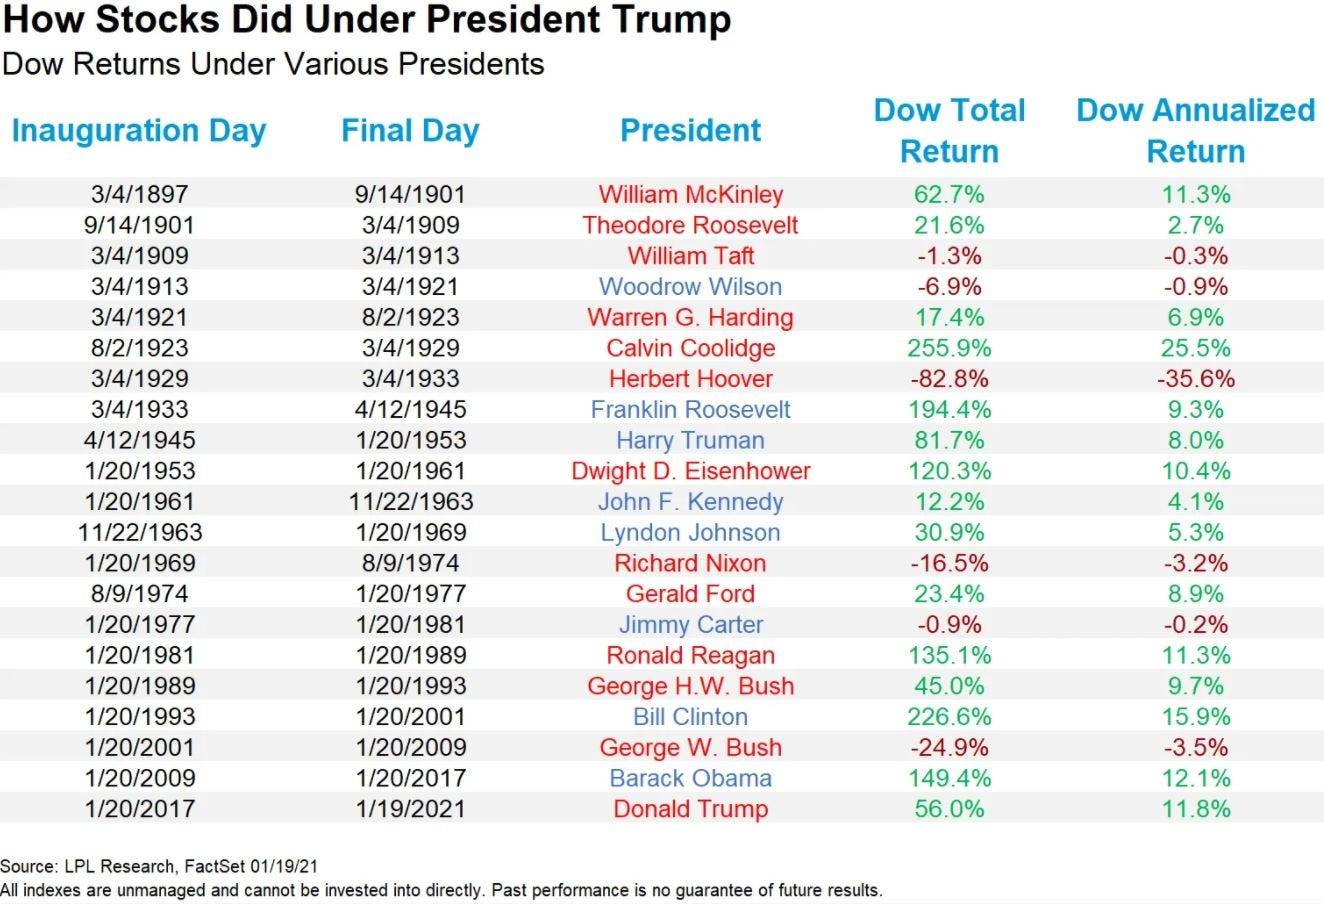 Here's how the stock market performed under President Donald Trump, and